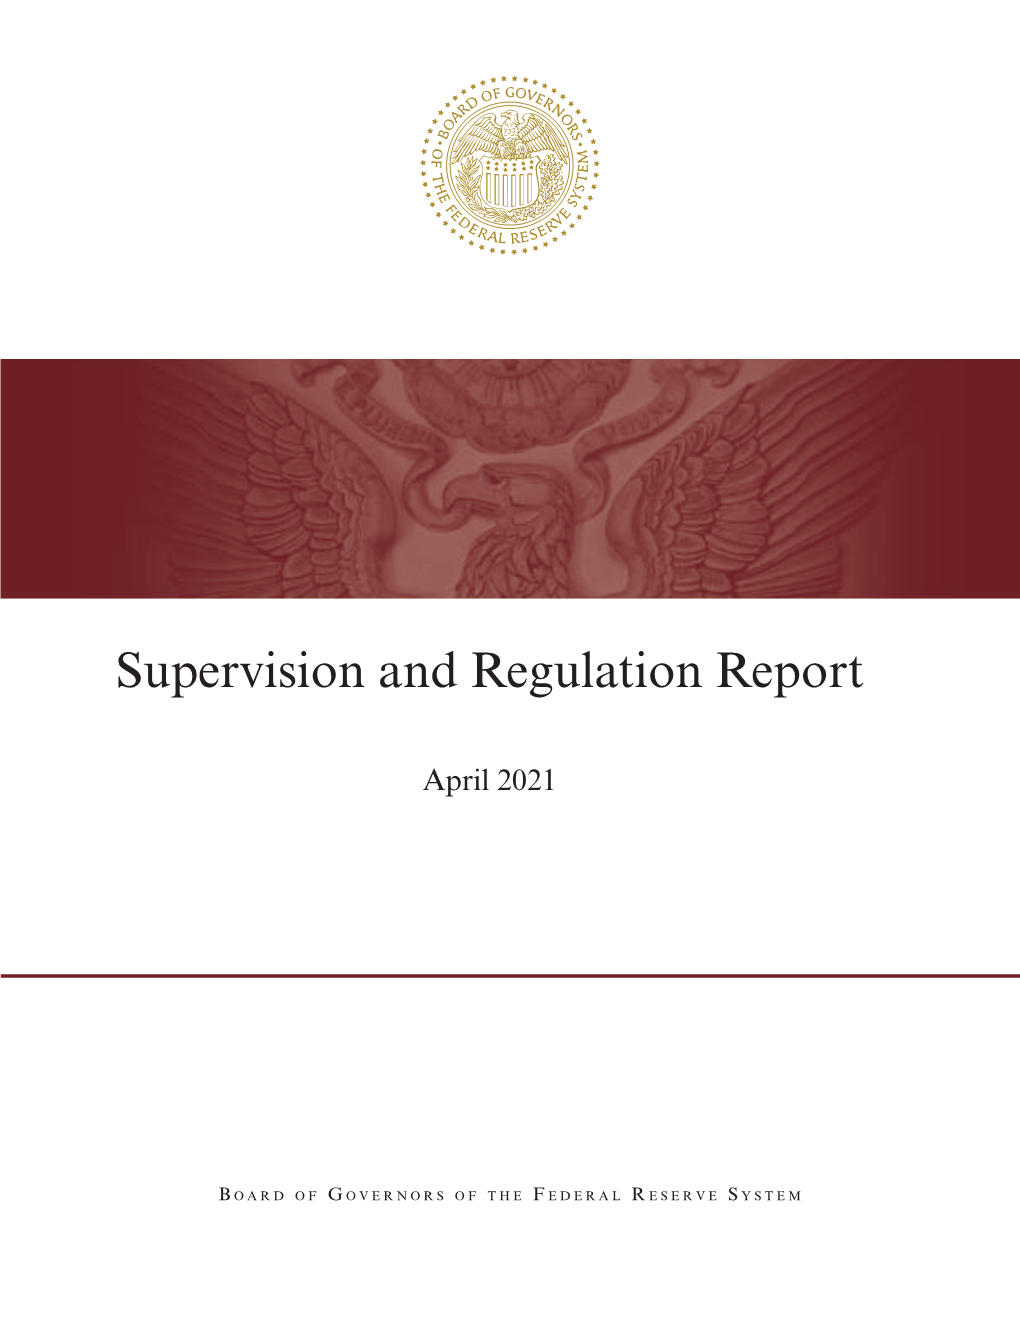 Federal Reserve Board Publication- Supervision and Regulation Report